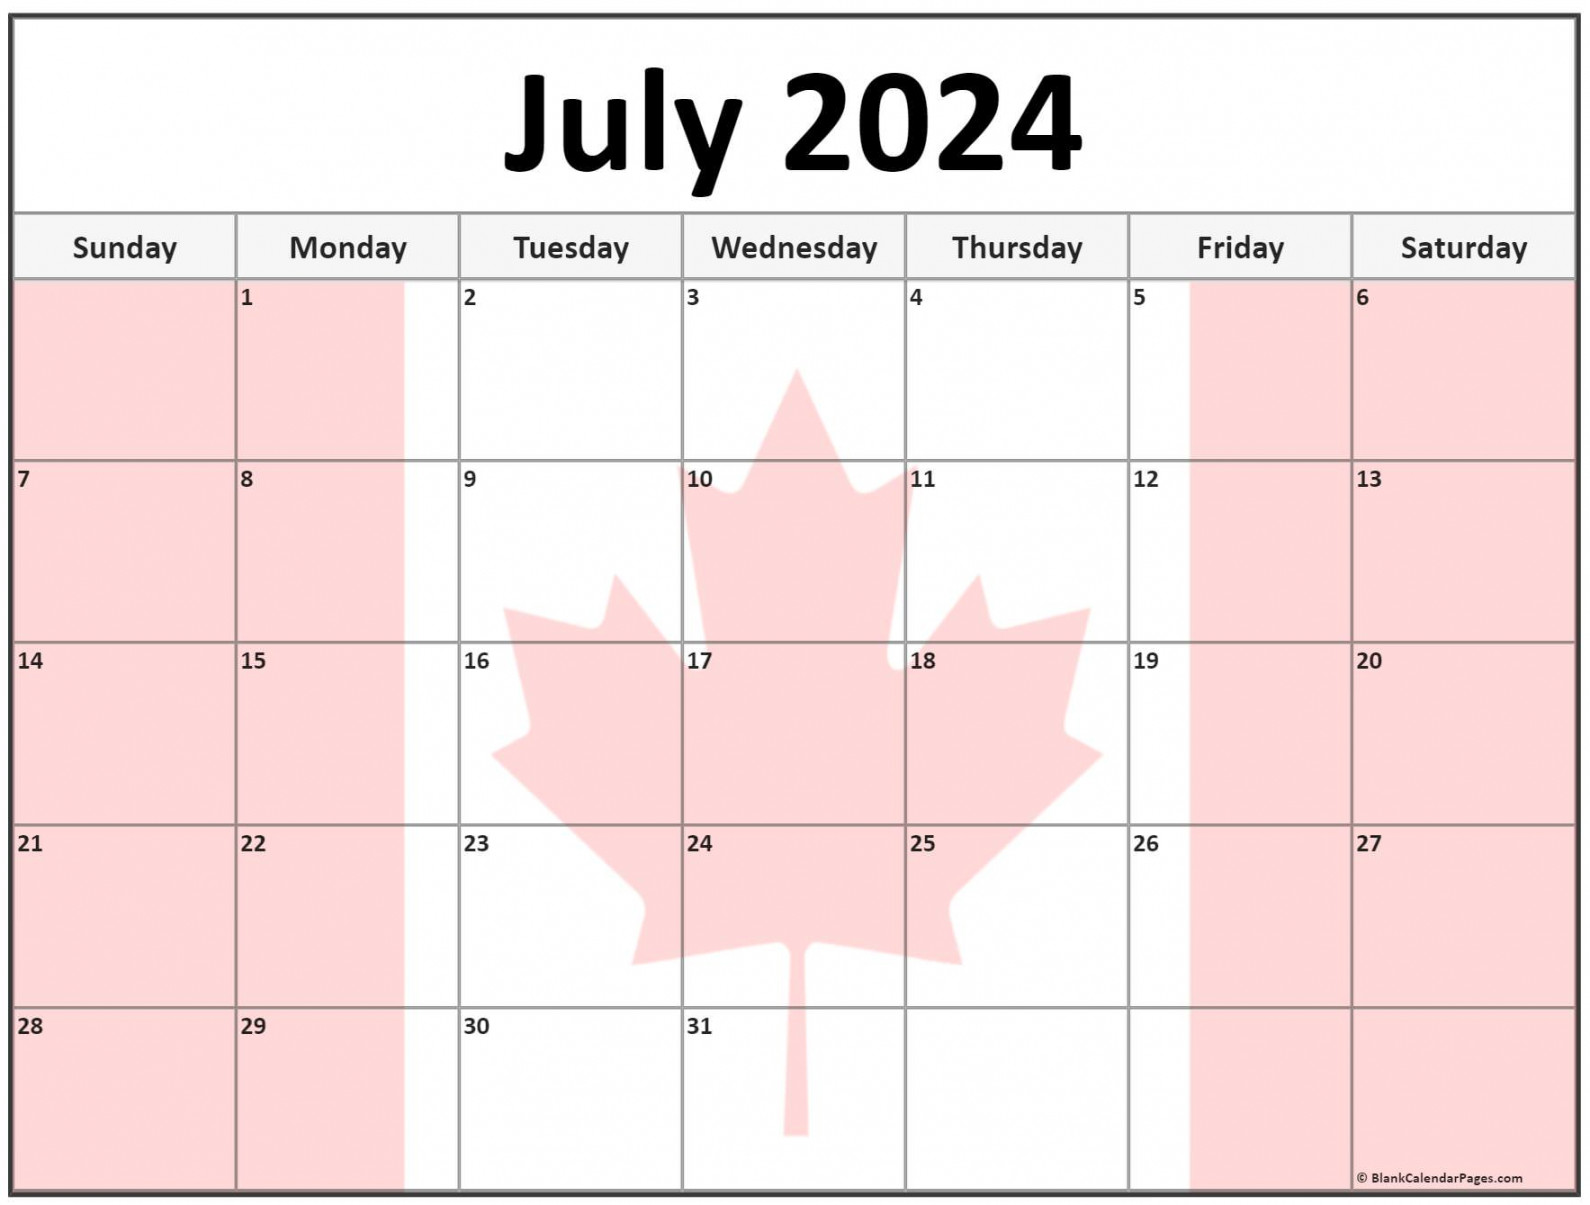 collection of july photo calendars with image filters